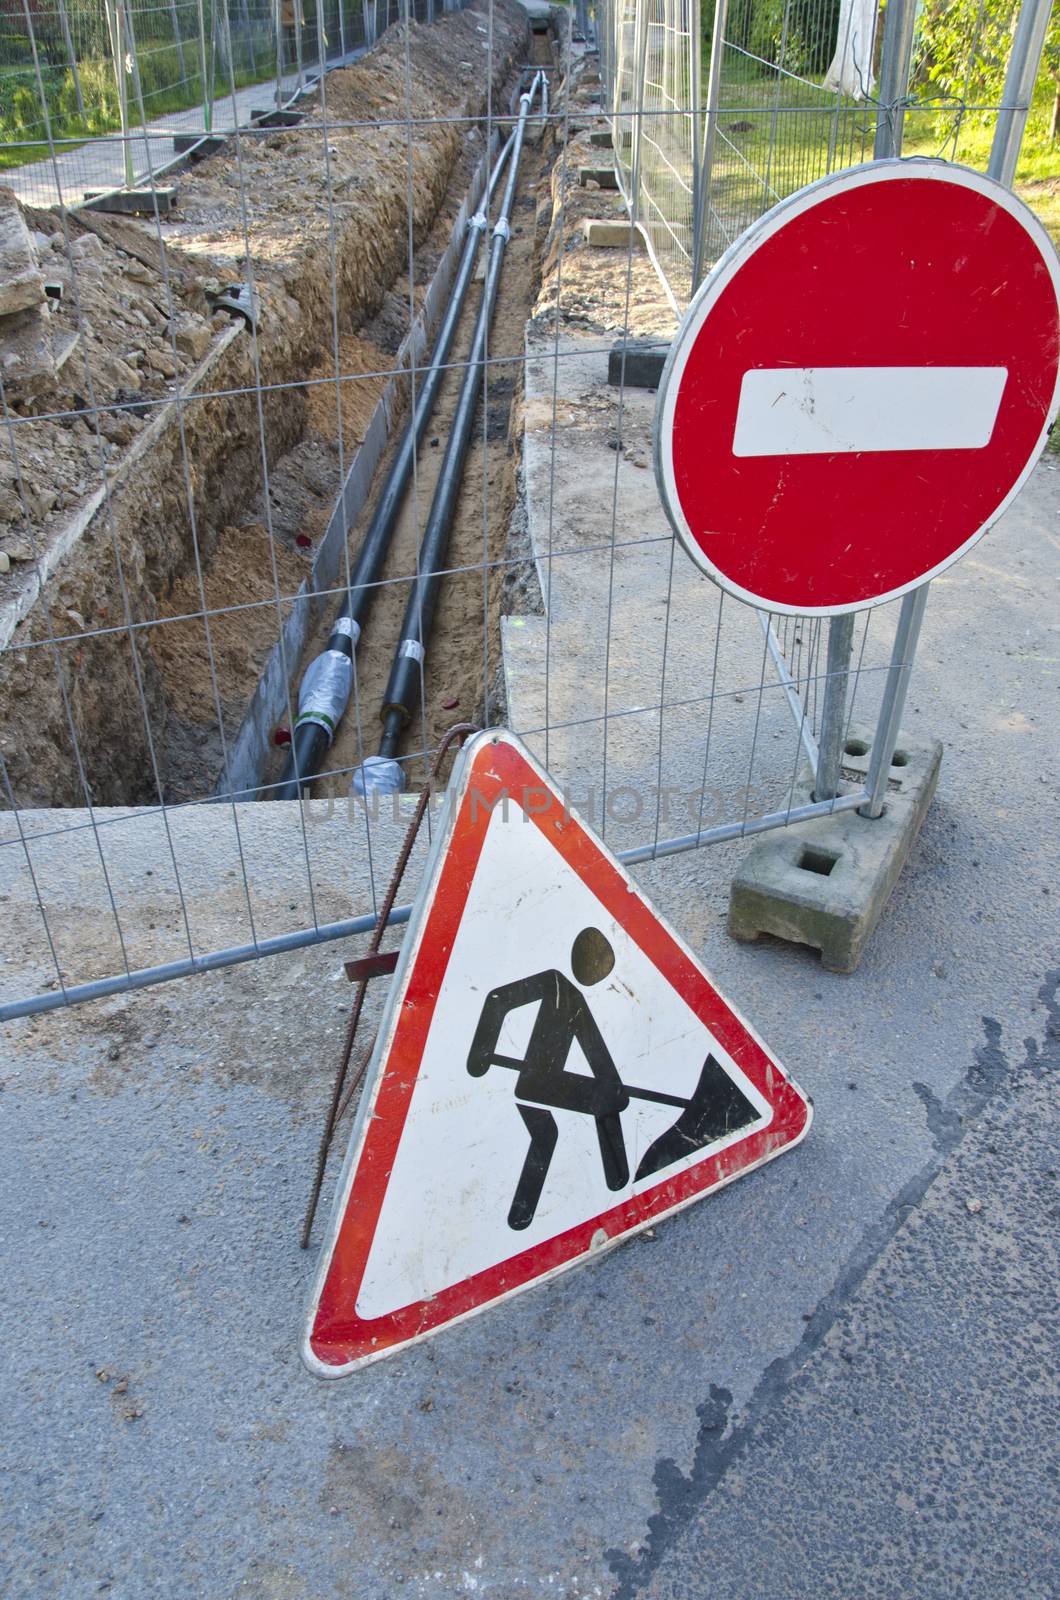 new heating system pipes in trench and road signs on street